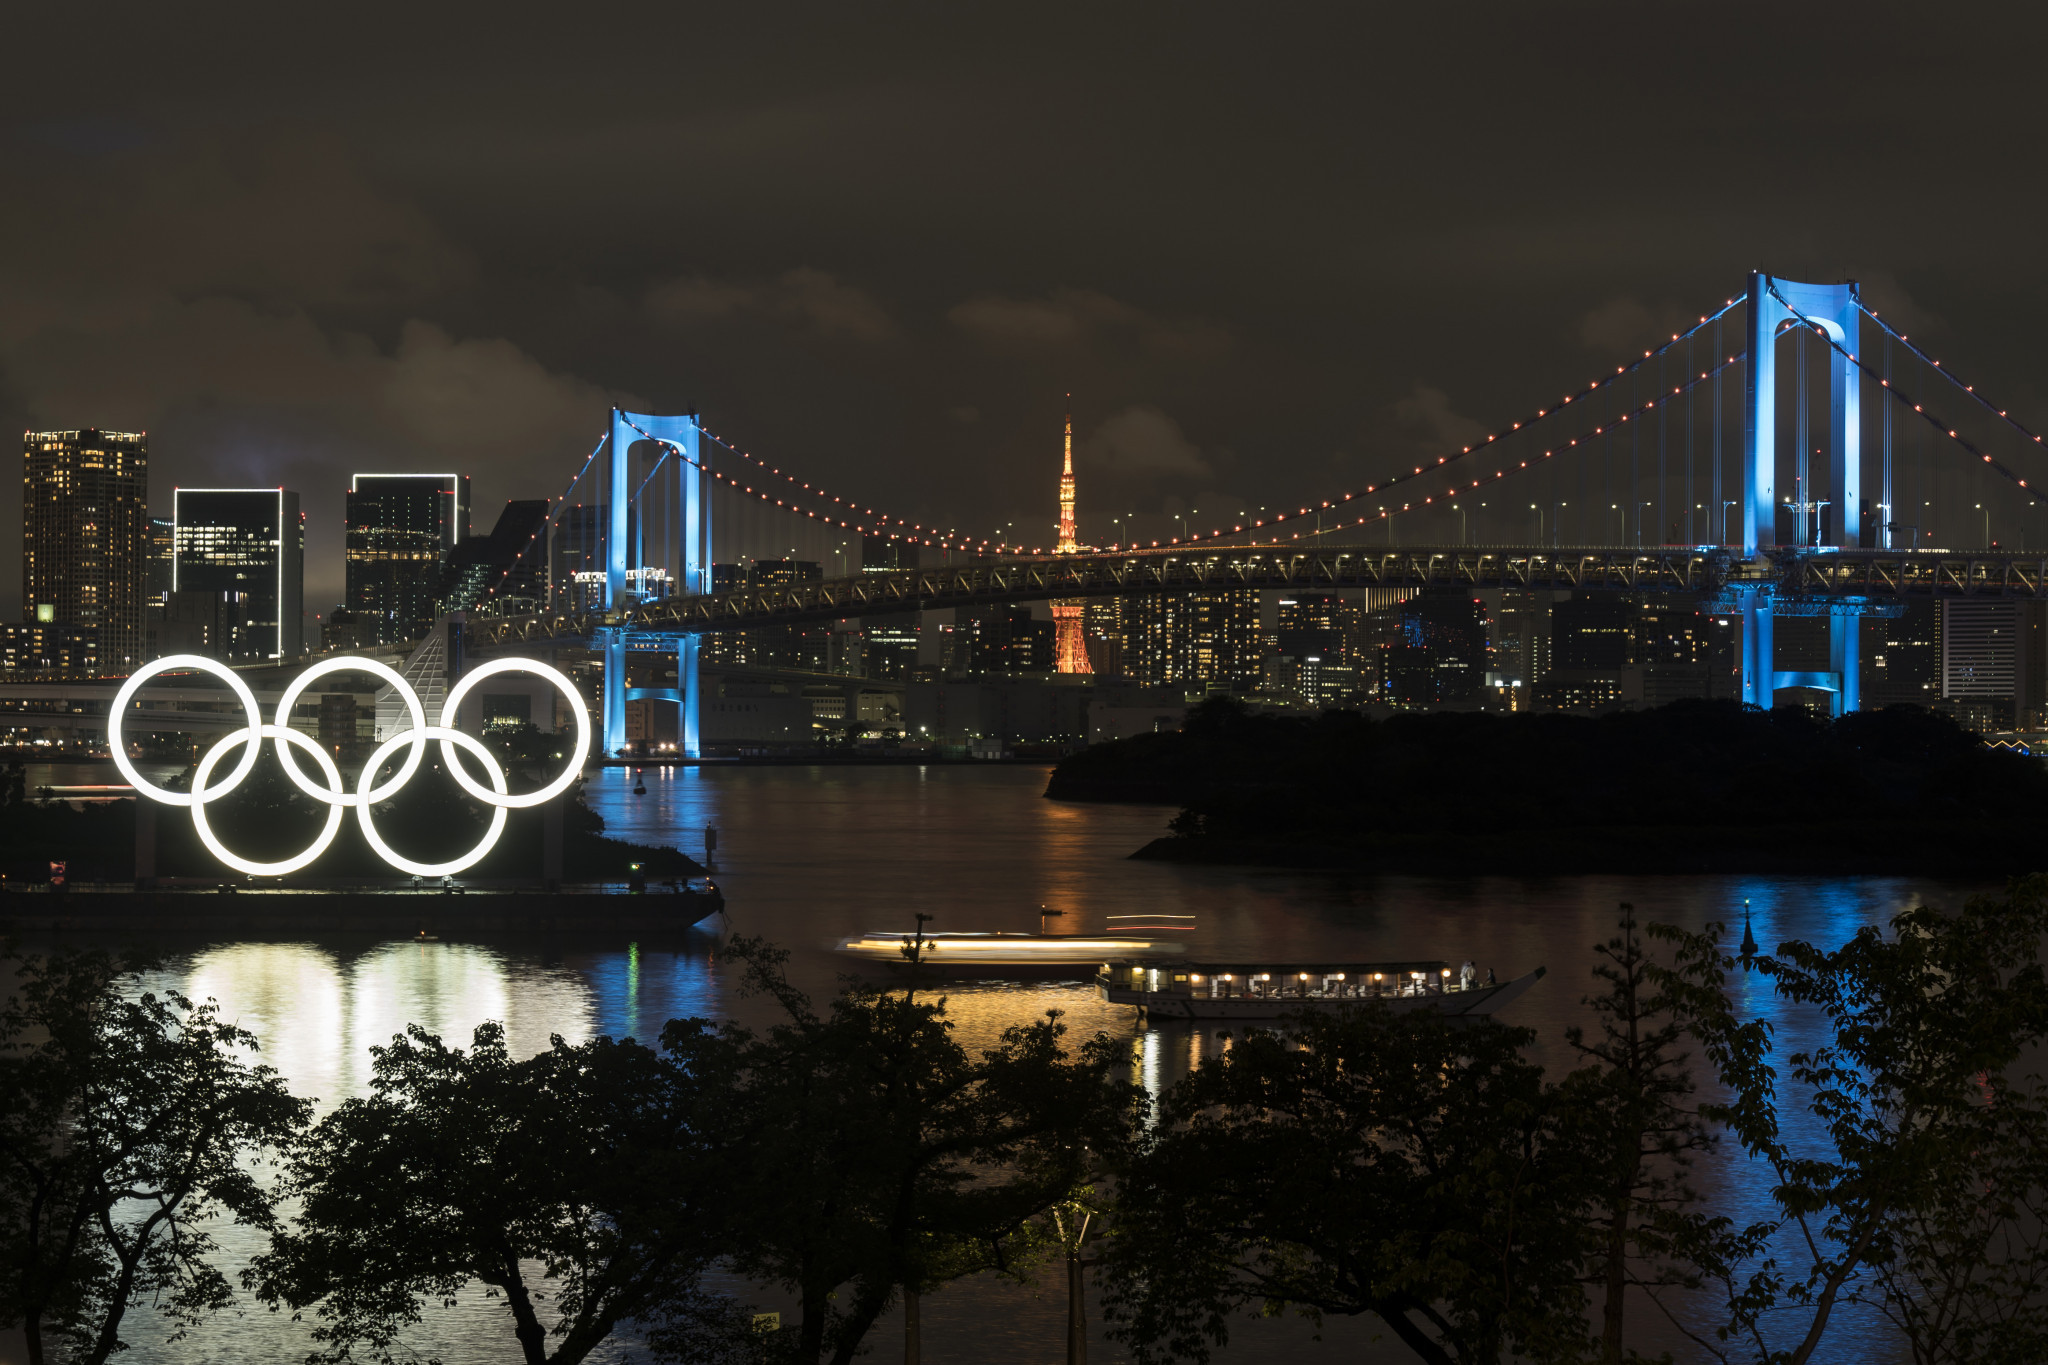 Tokyo 2020 has been postponed until 2021 because of the coronavirus pandemic ©Getty Images